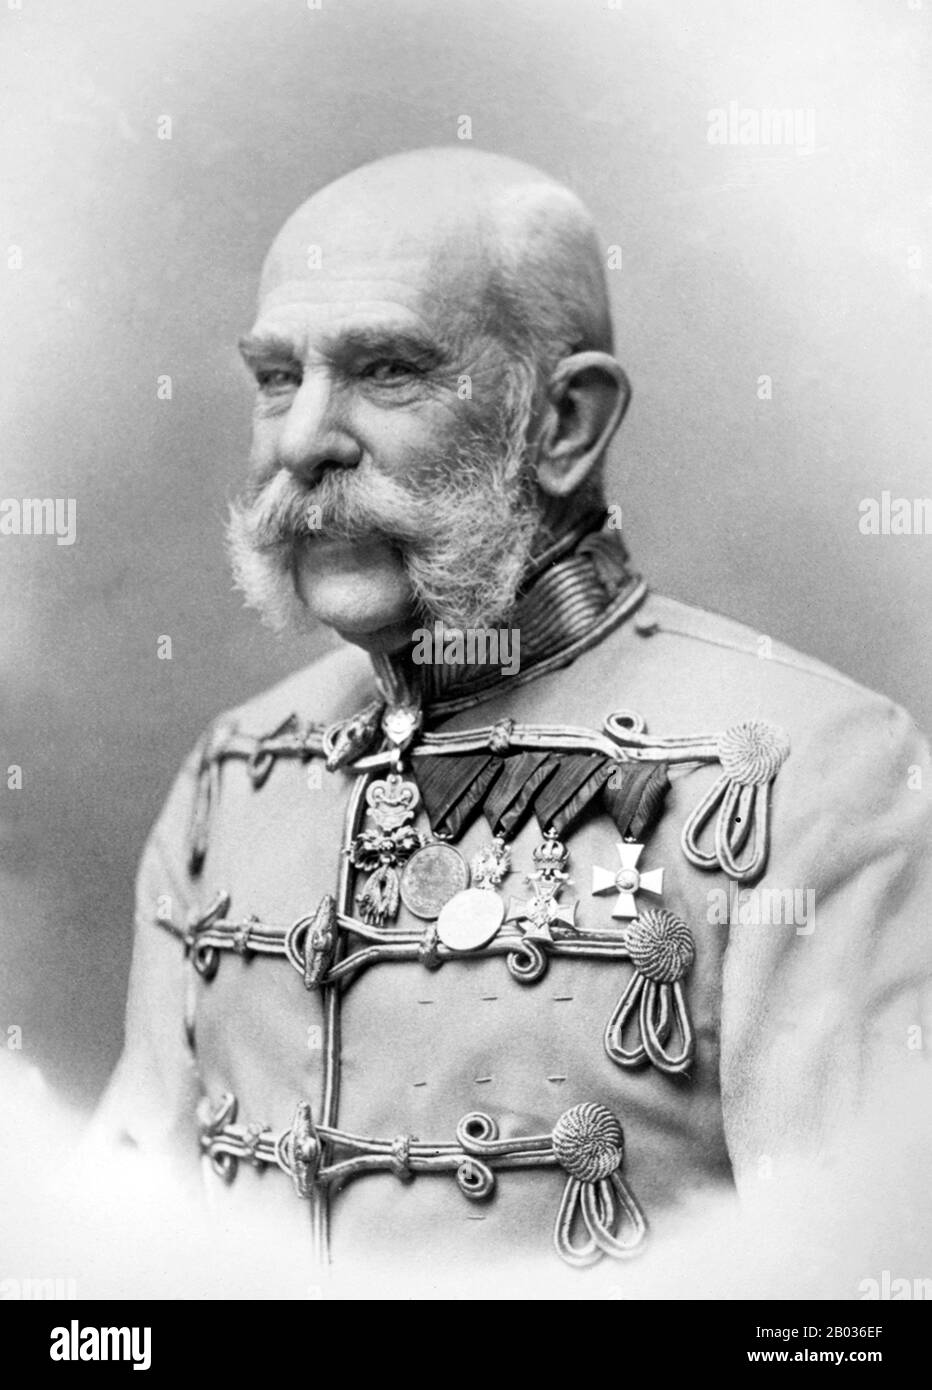 Franz Joseph I or Francis Joseph I (German: Franz Joseph I., Hungarian: I. Ferenc Jozsef, Croatian: Franjo Josip I, Czech: Frantisek Josef I, Italian: Francesco Giuseppe; 18 August 1830 – 21 November 1916) was Emperor of Austria and King of Hungary, Croatia and Bohemia from 2 December 1848 until his death on 21 November 1916.  From 1 May 1850 to 24 August 1866 he was also President of the German Confederation. He was the longest-reigning Emperor of Austria and King of Hungary, as well as the third longest-reigning monarch of any country in European history, after Louis XIV of France and Johann Stock Photo